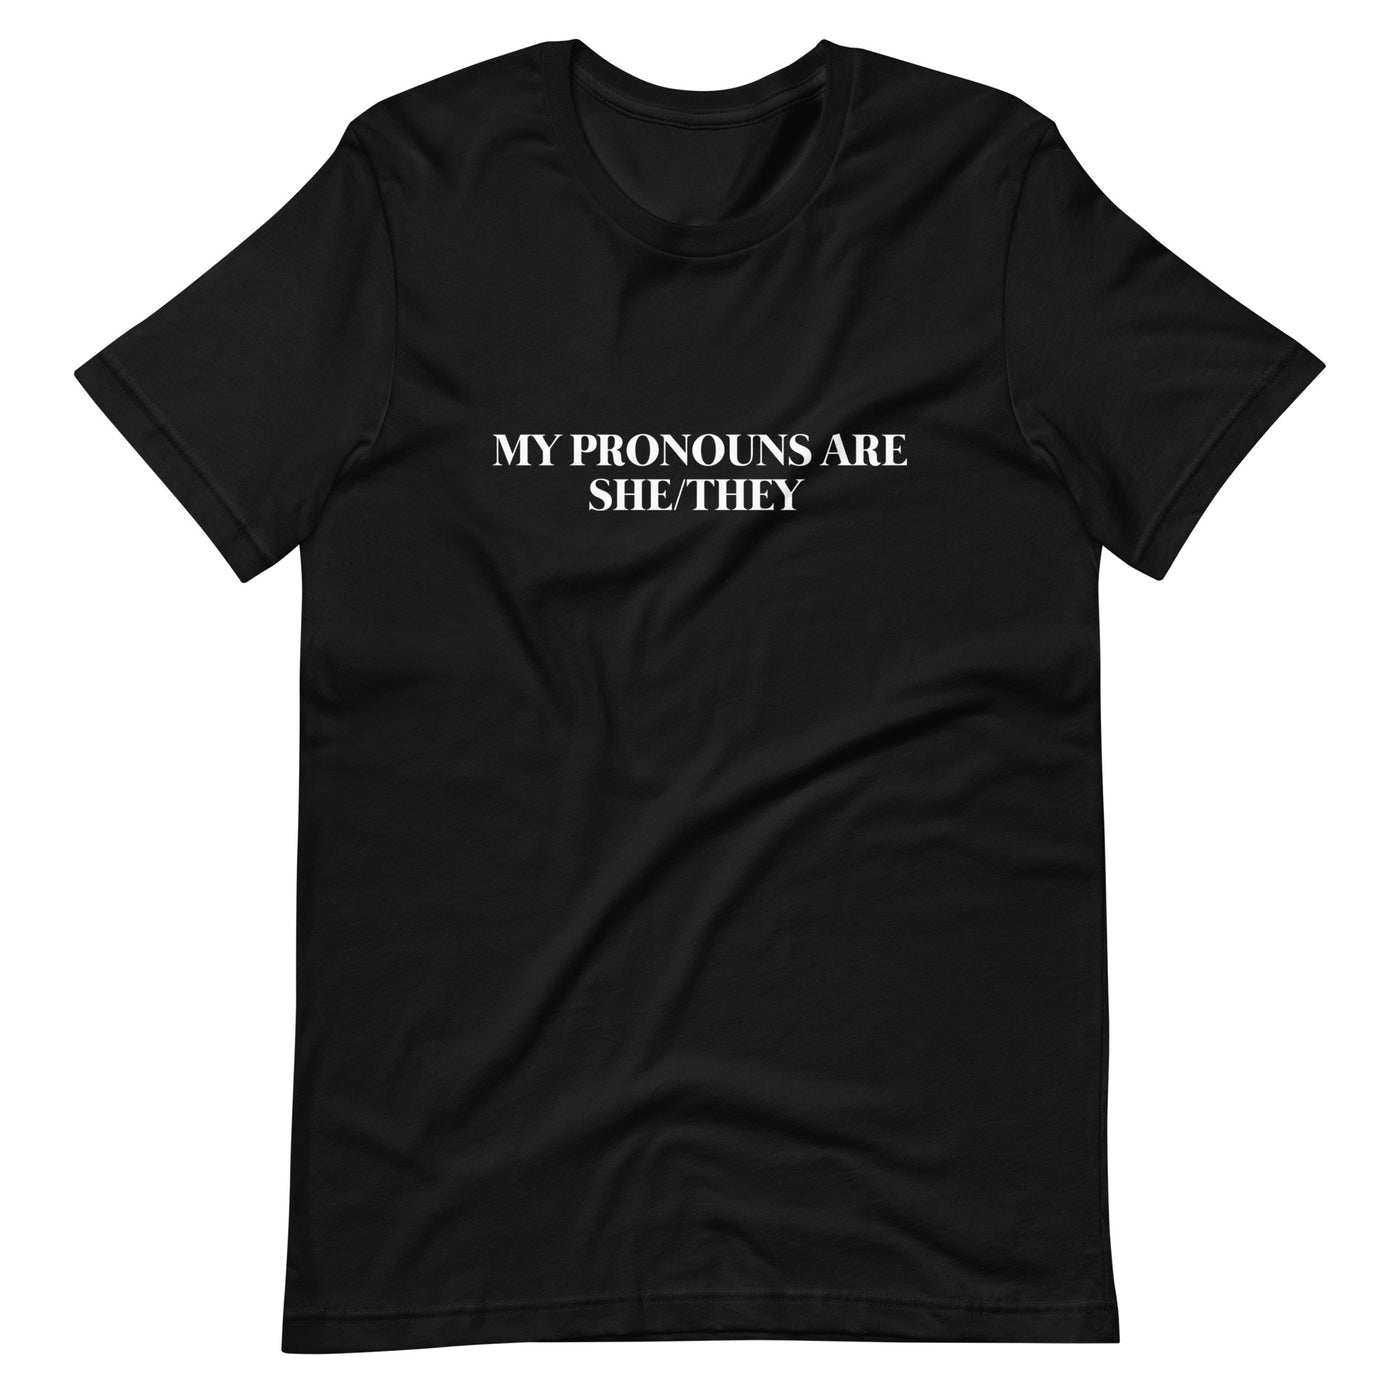 Pride Clothes - No Need to Ask, My Pronouns Are She/They T-Shirt - Black